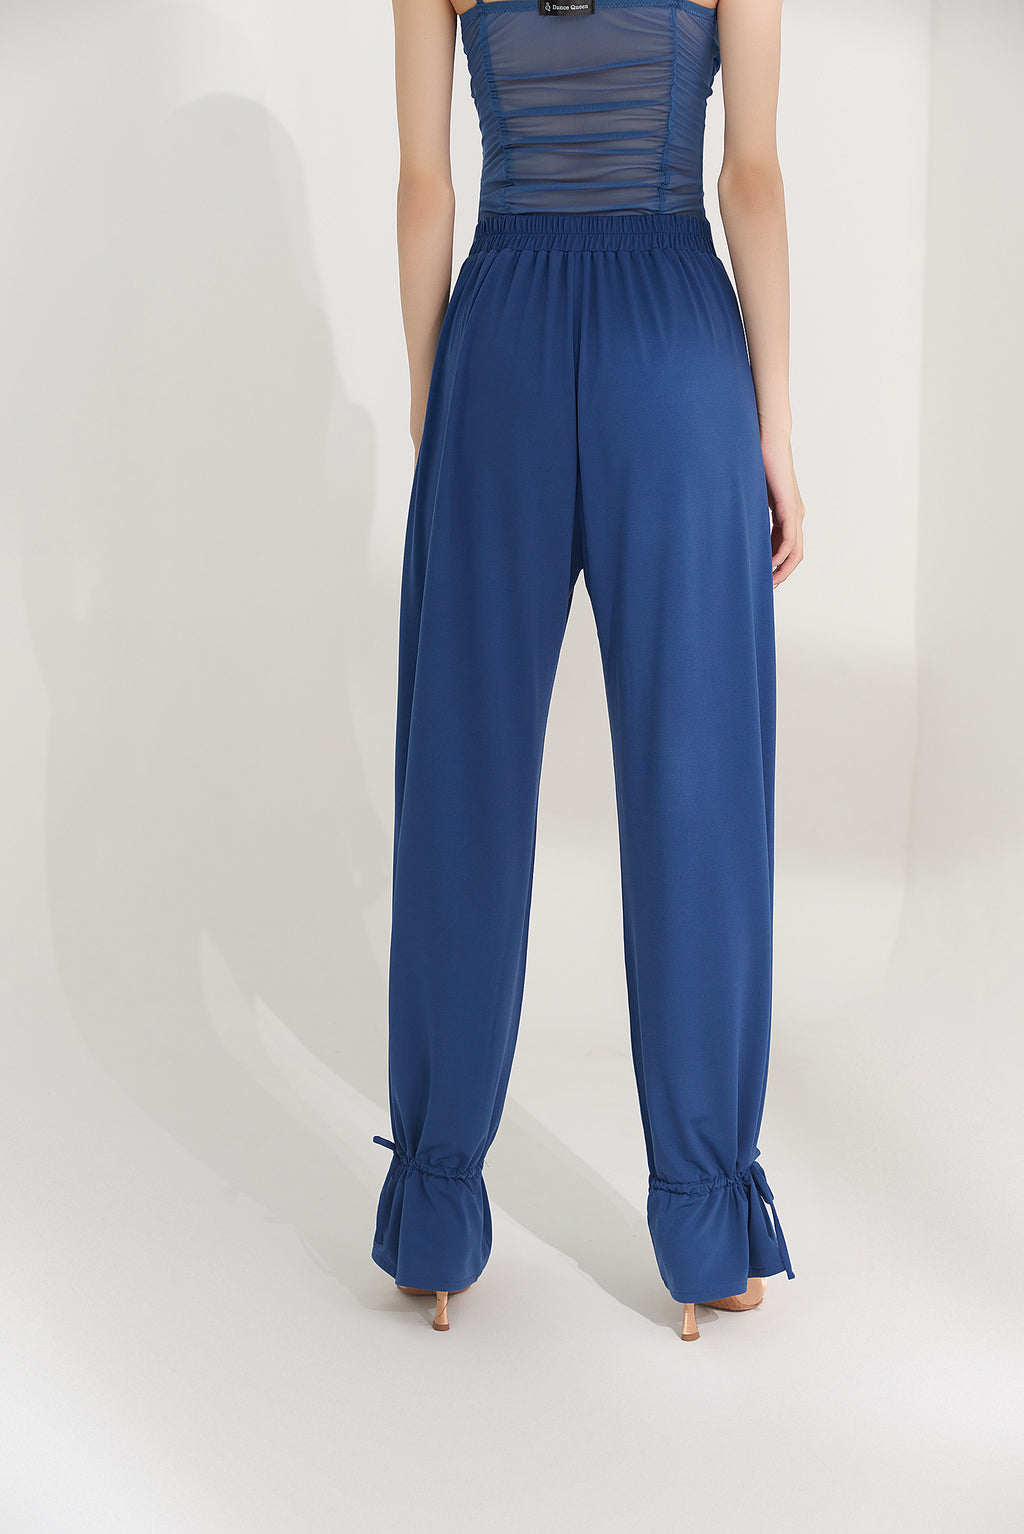 DQ-266  DANCE QUEEN Ankle Strap Trousers